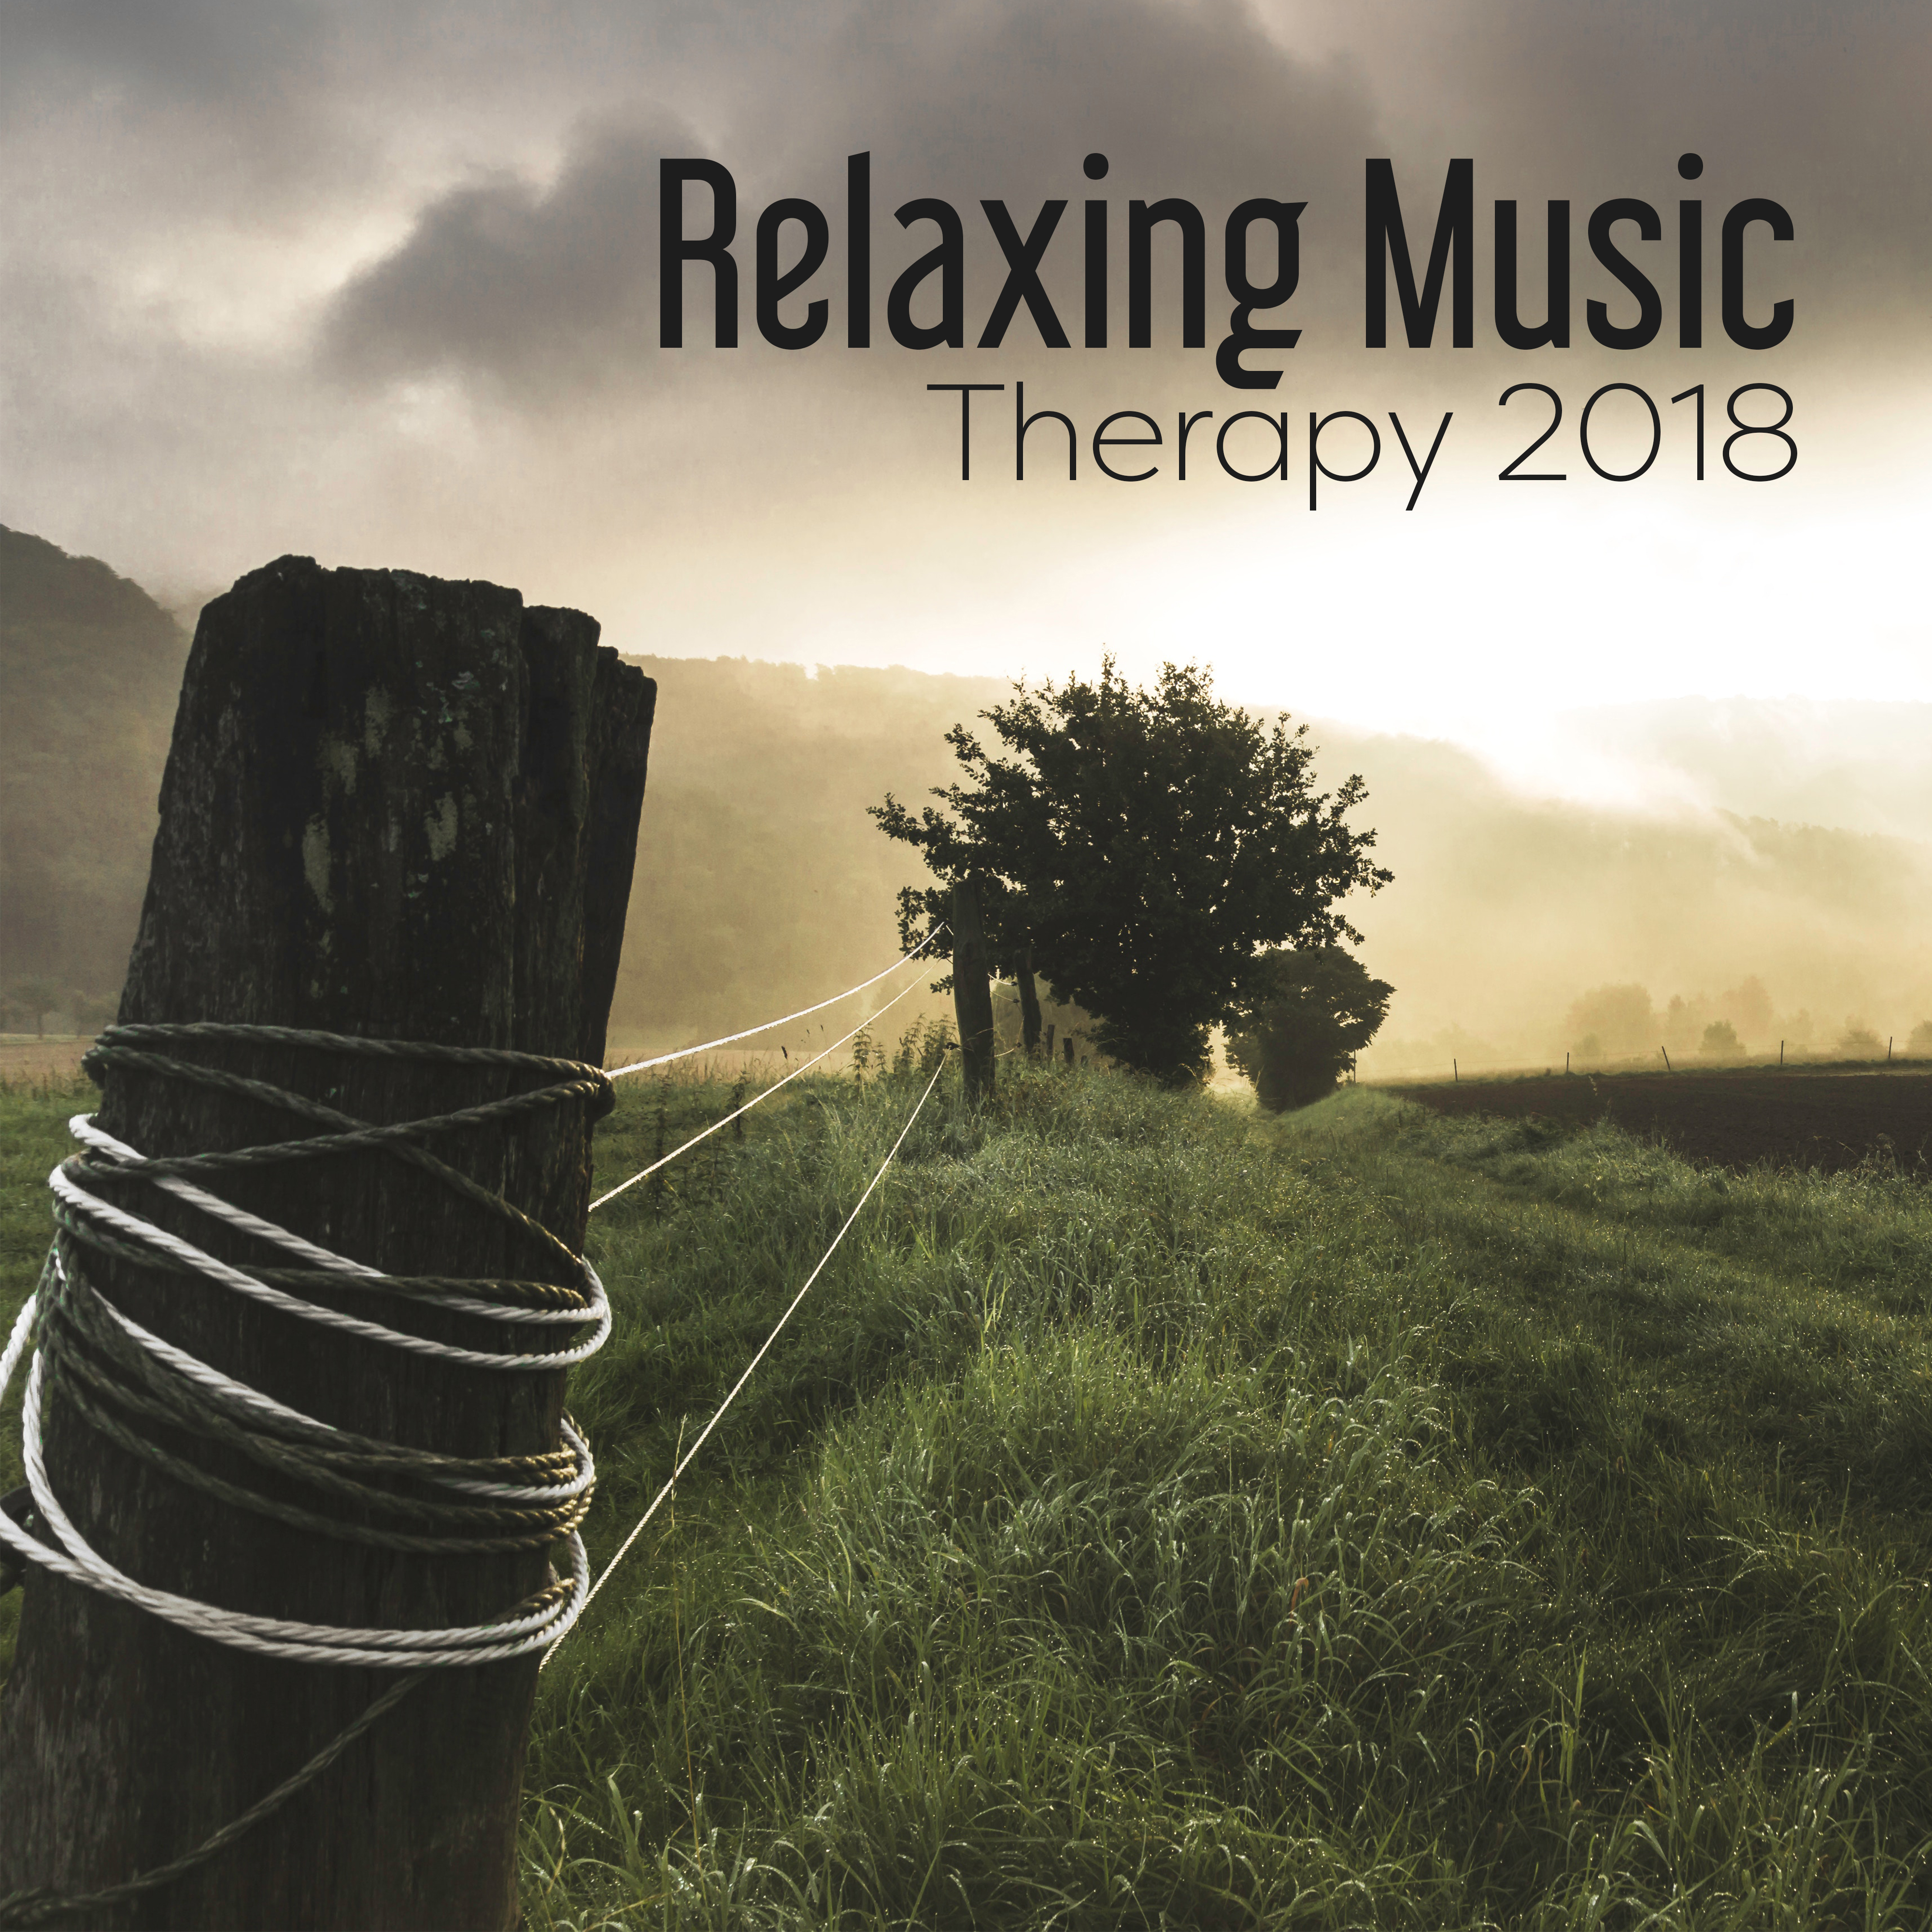 Relaxing Music Therapy 2018